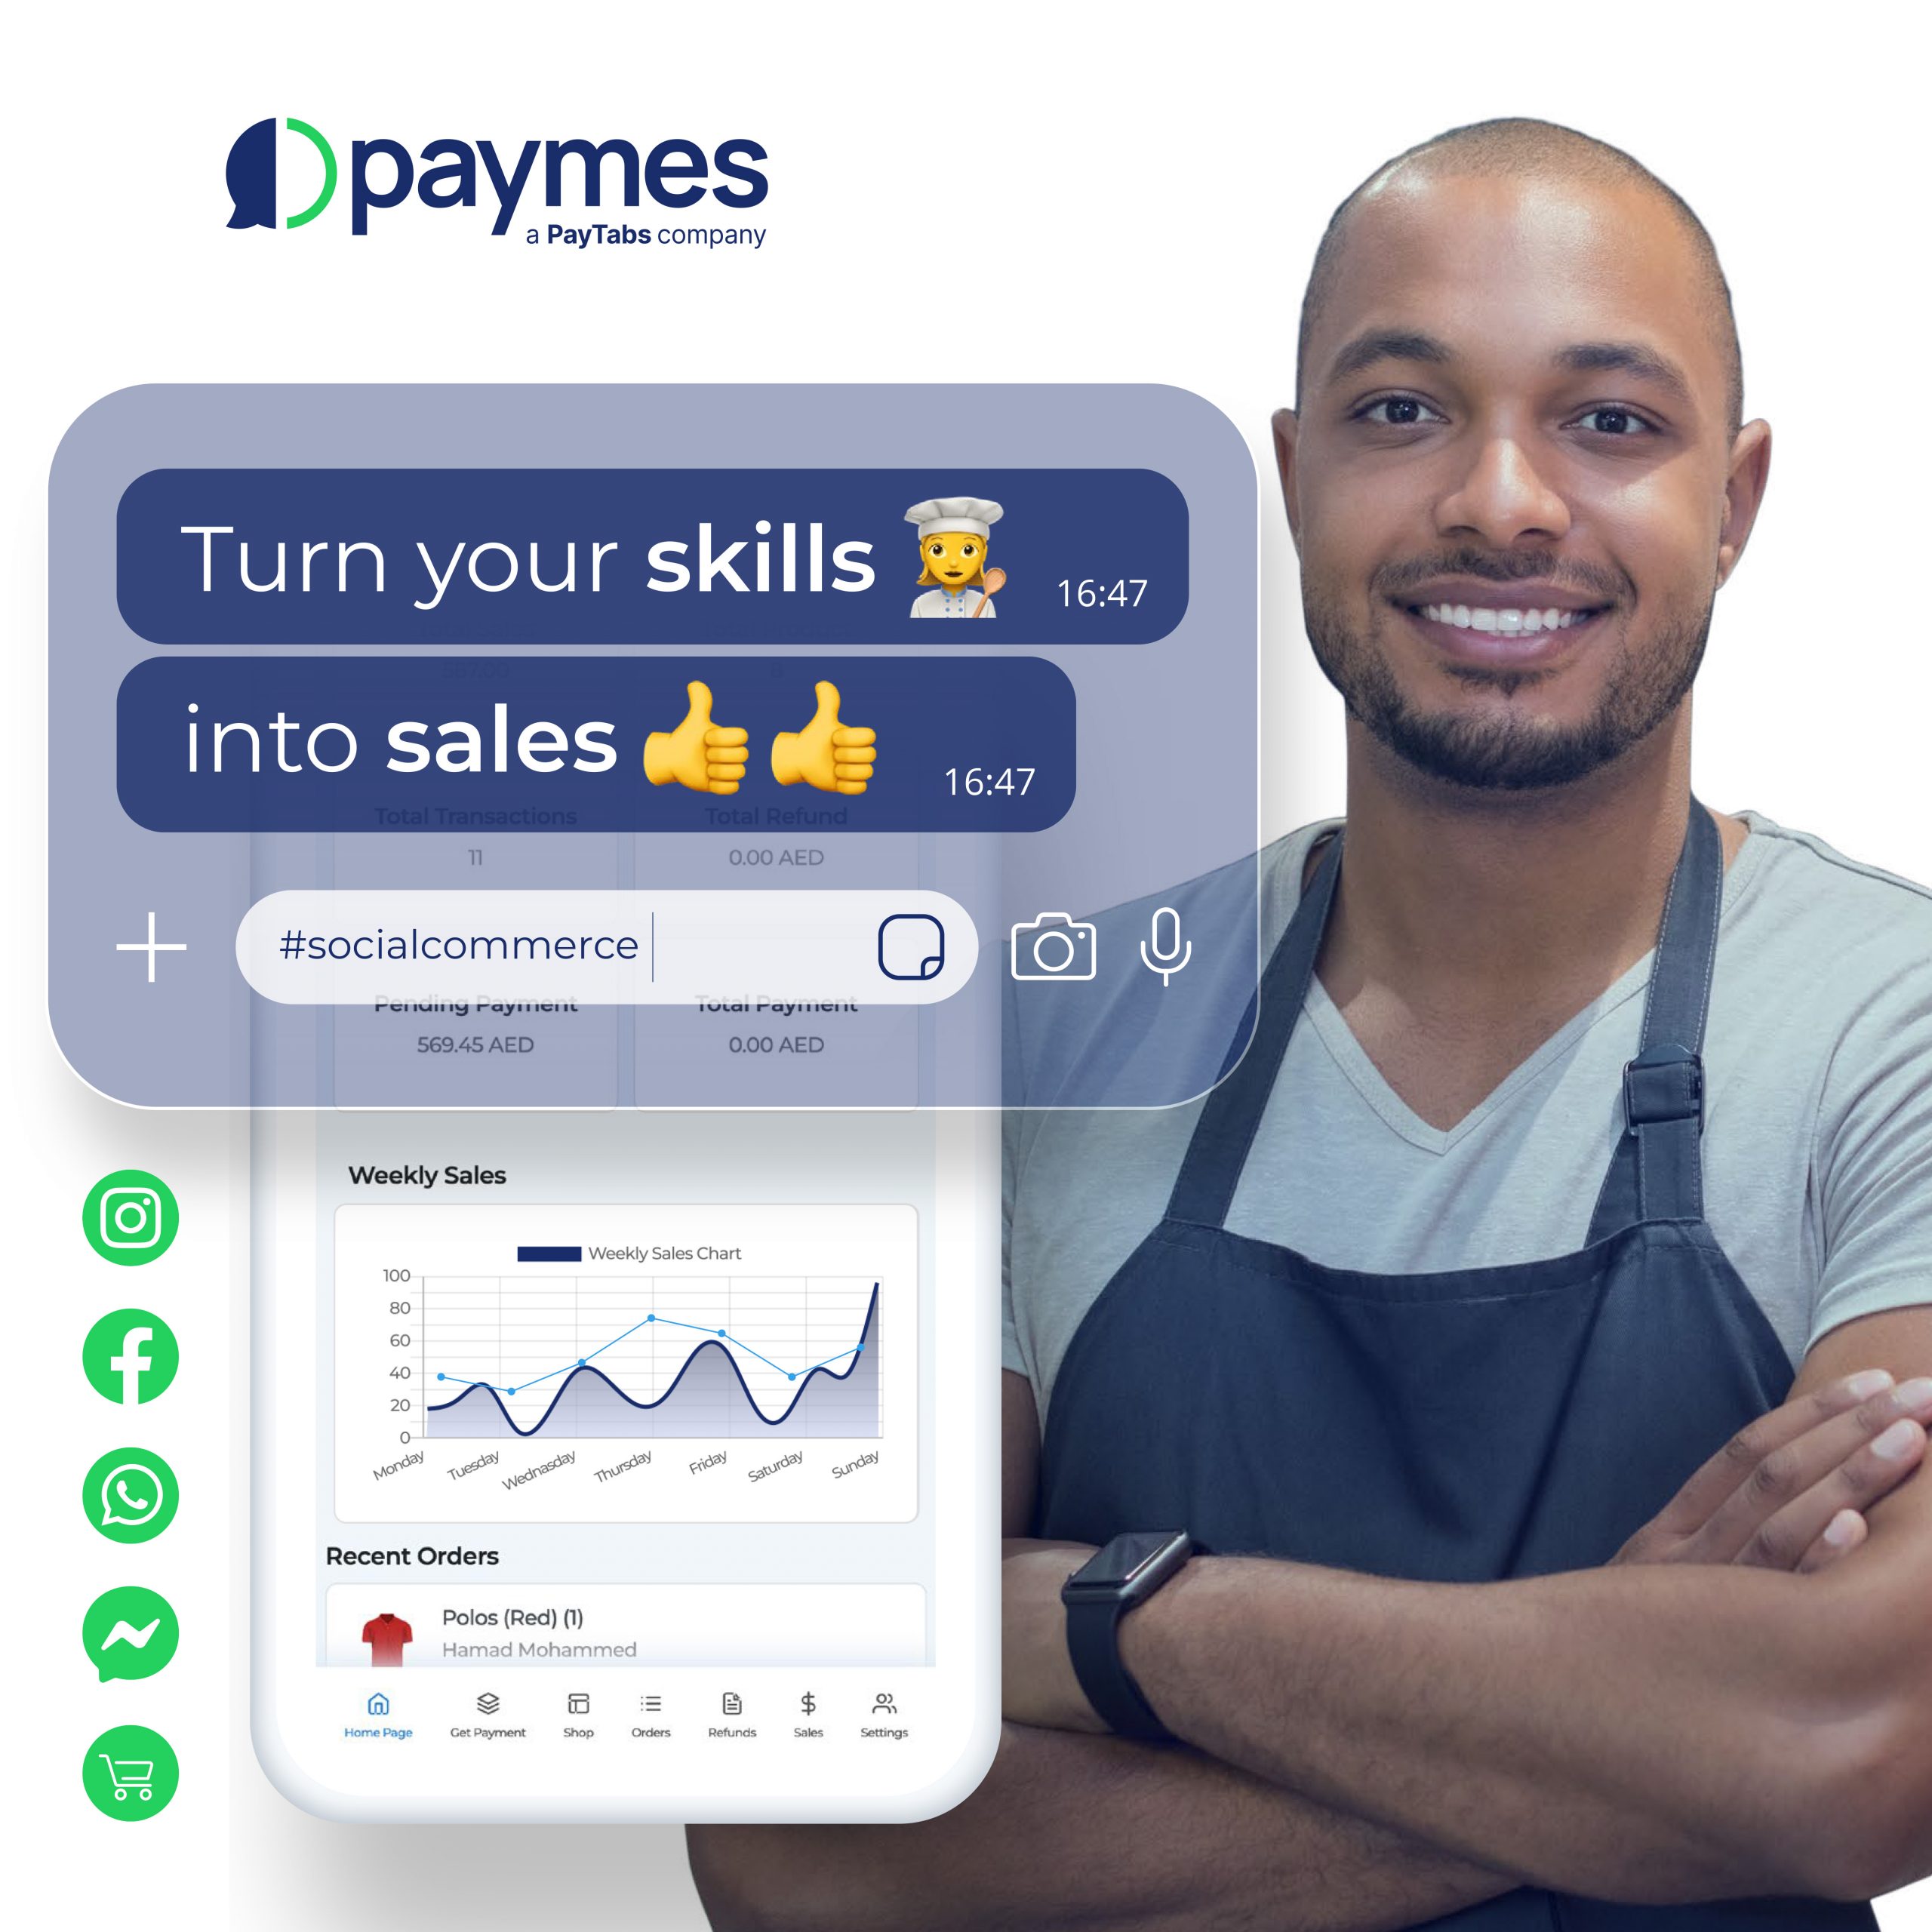 Top 10 Benefits of Paymes Payment Platform for Small Businesses